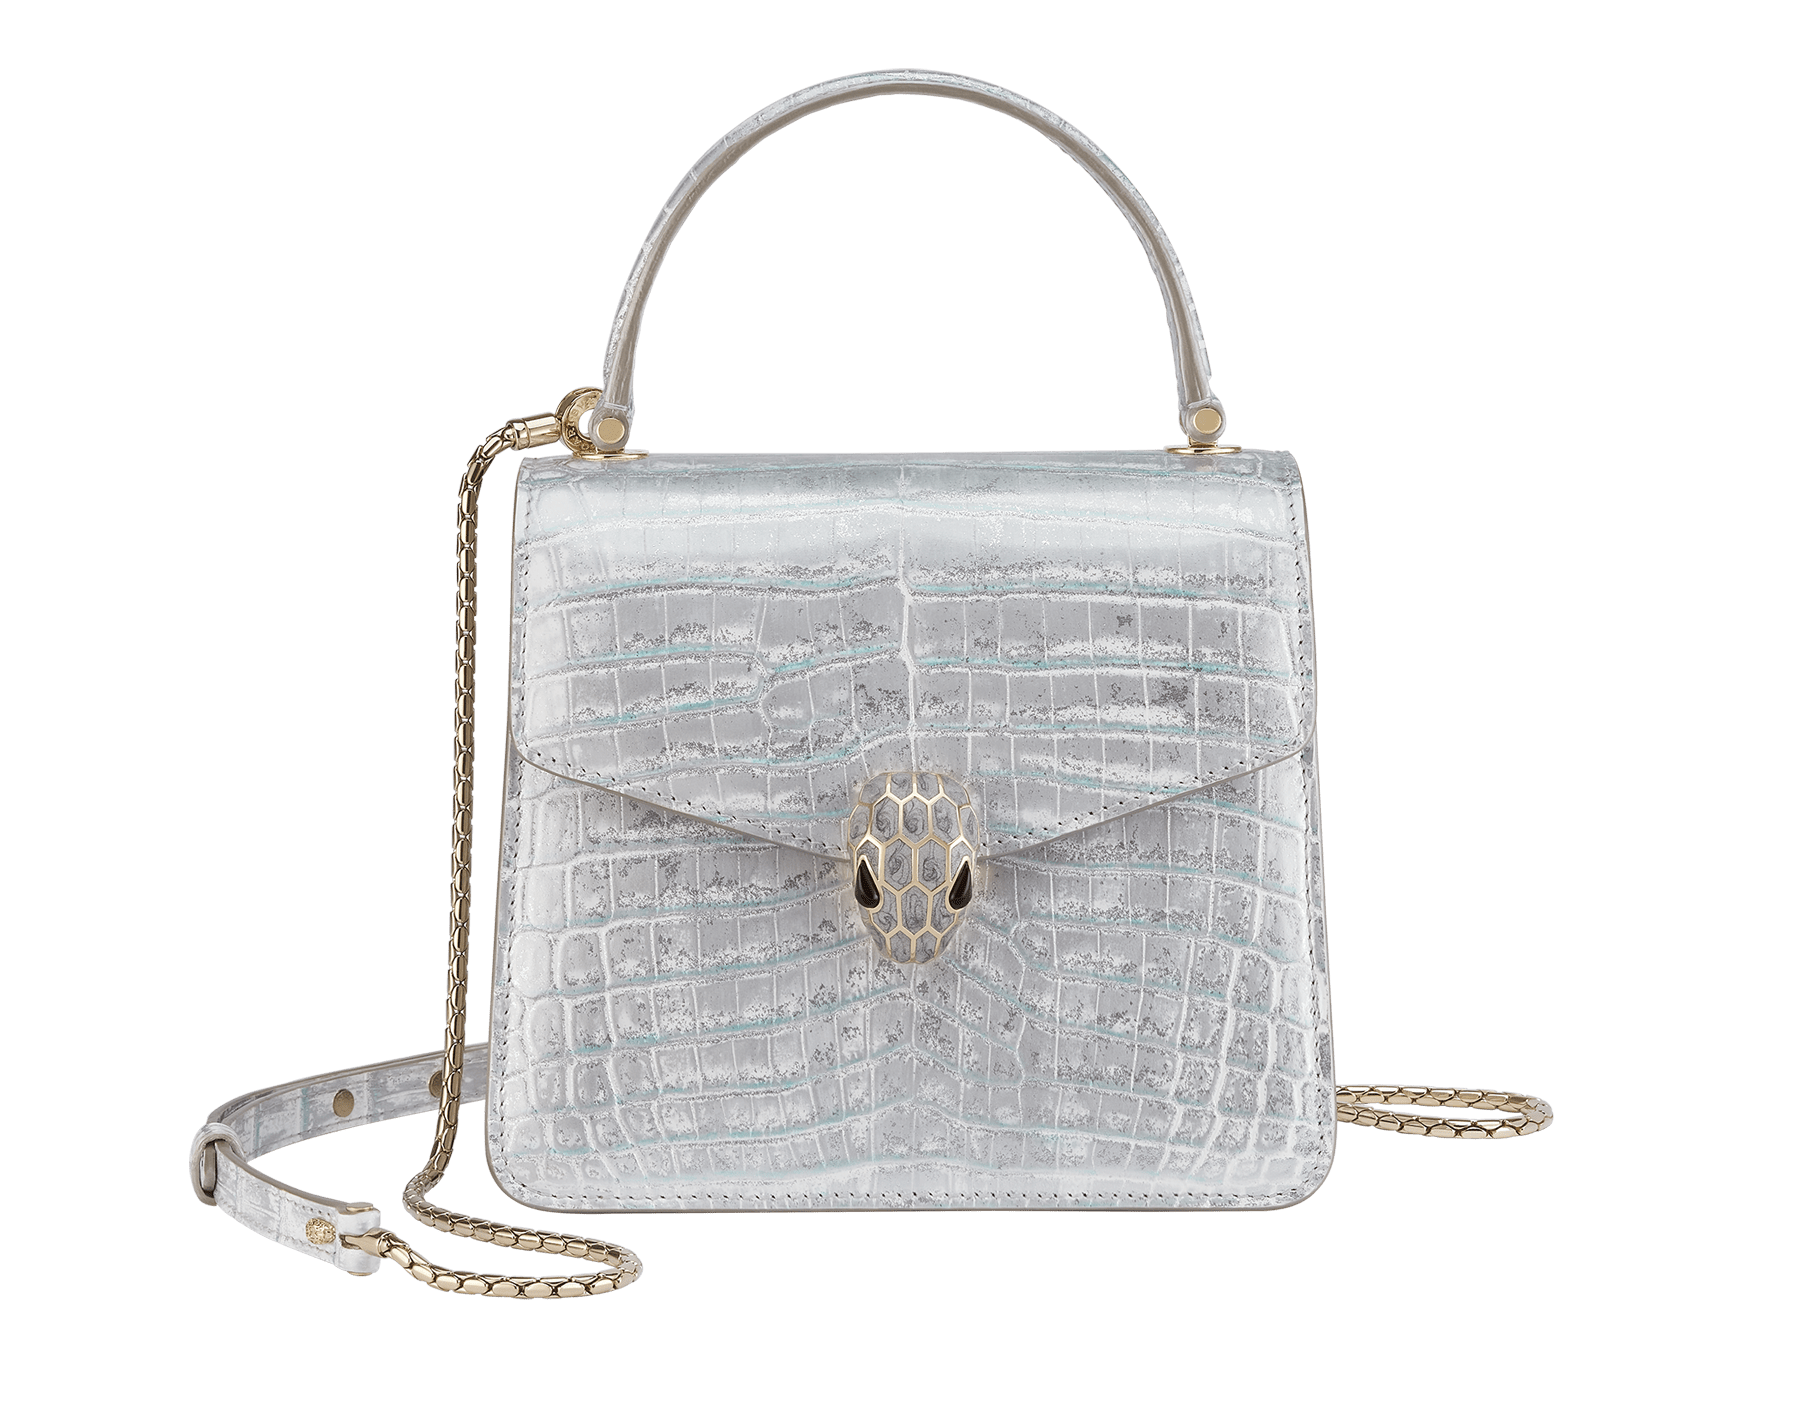 Serpenti Forever small top handle bag in white Snow Crystal crocodile skin with black nappa leather lining. Captivating snakehead press-stud closure in light gold-plated brass embellished with matt silver enamel scales and black onyx eyes. 292926 image 1